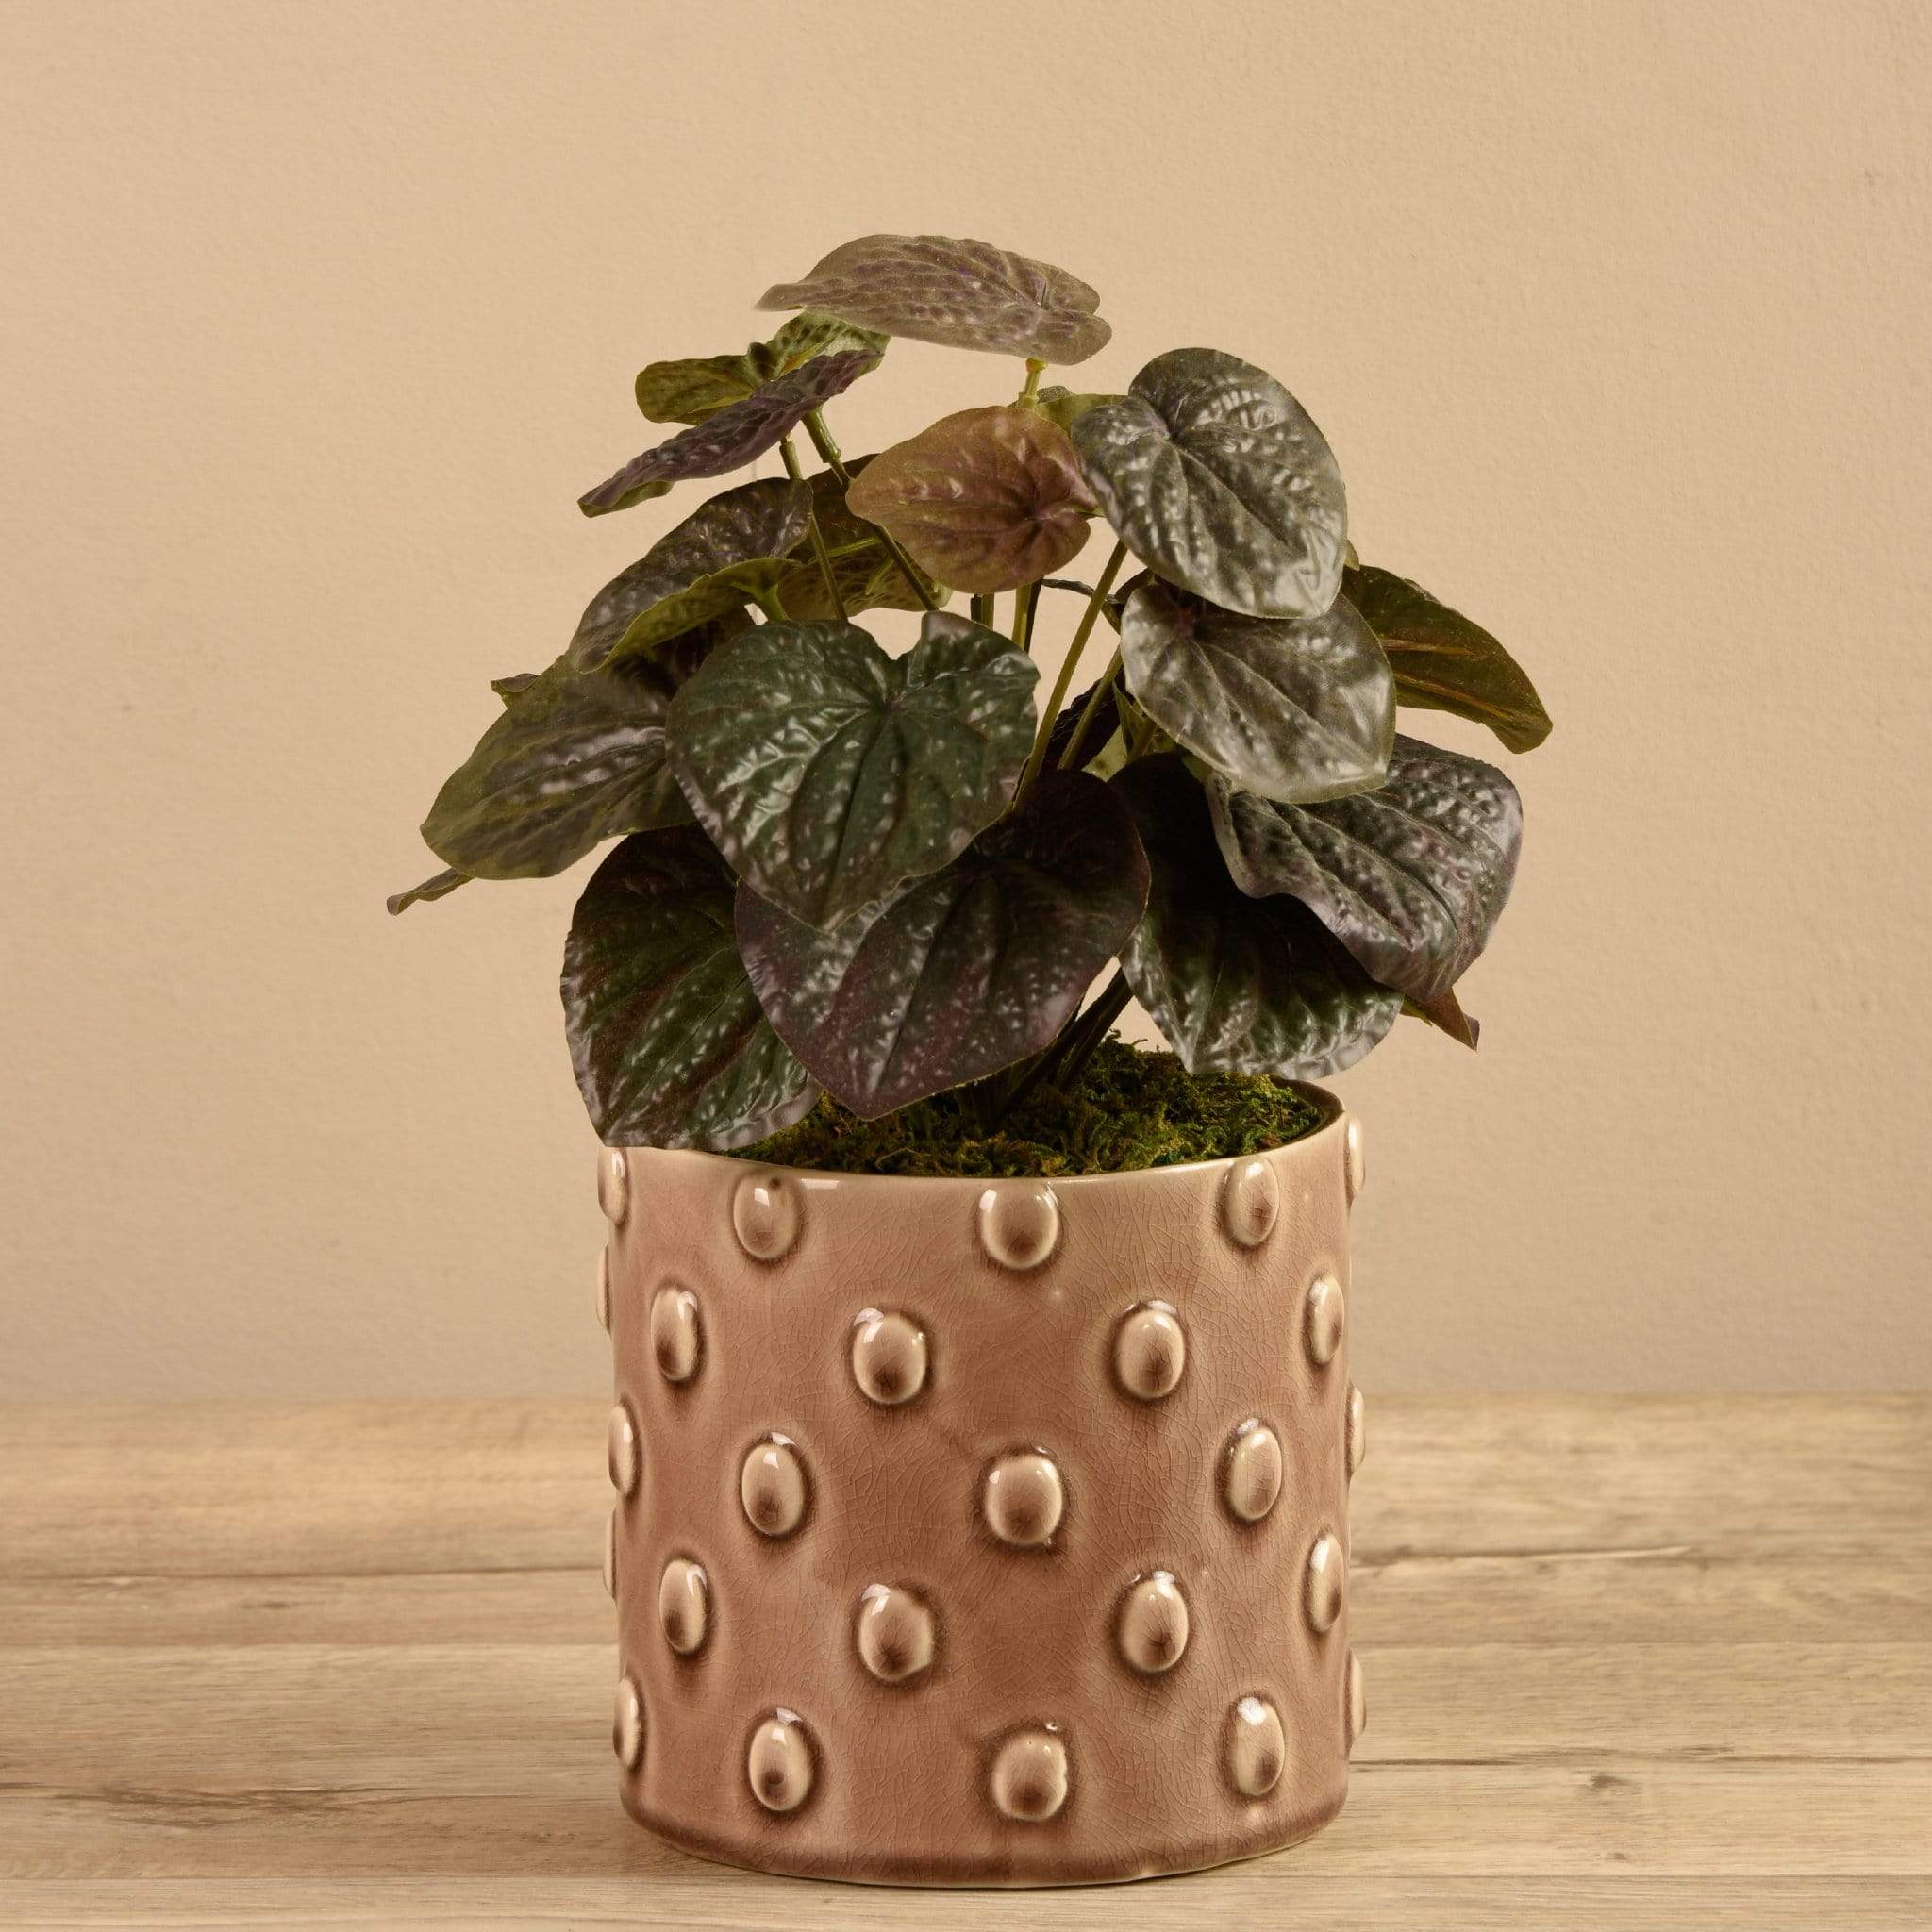 Potted Peperomia - Bloomr